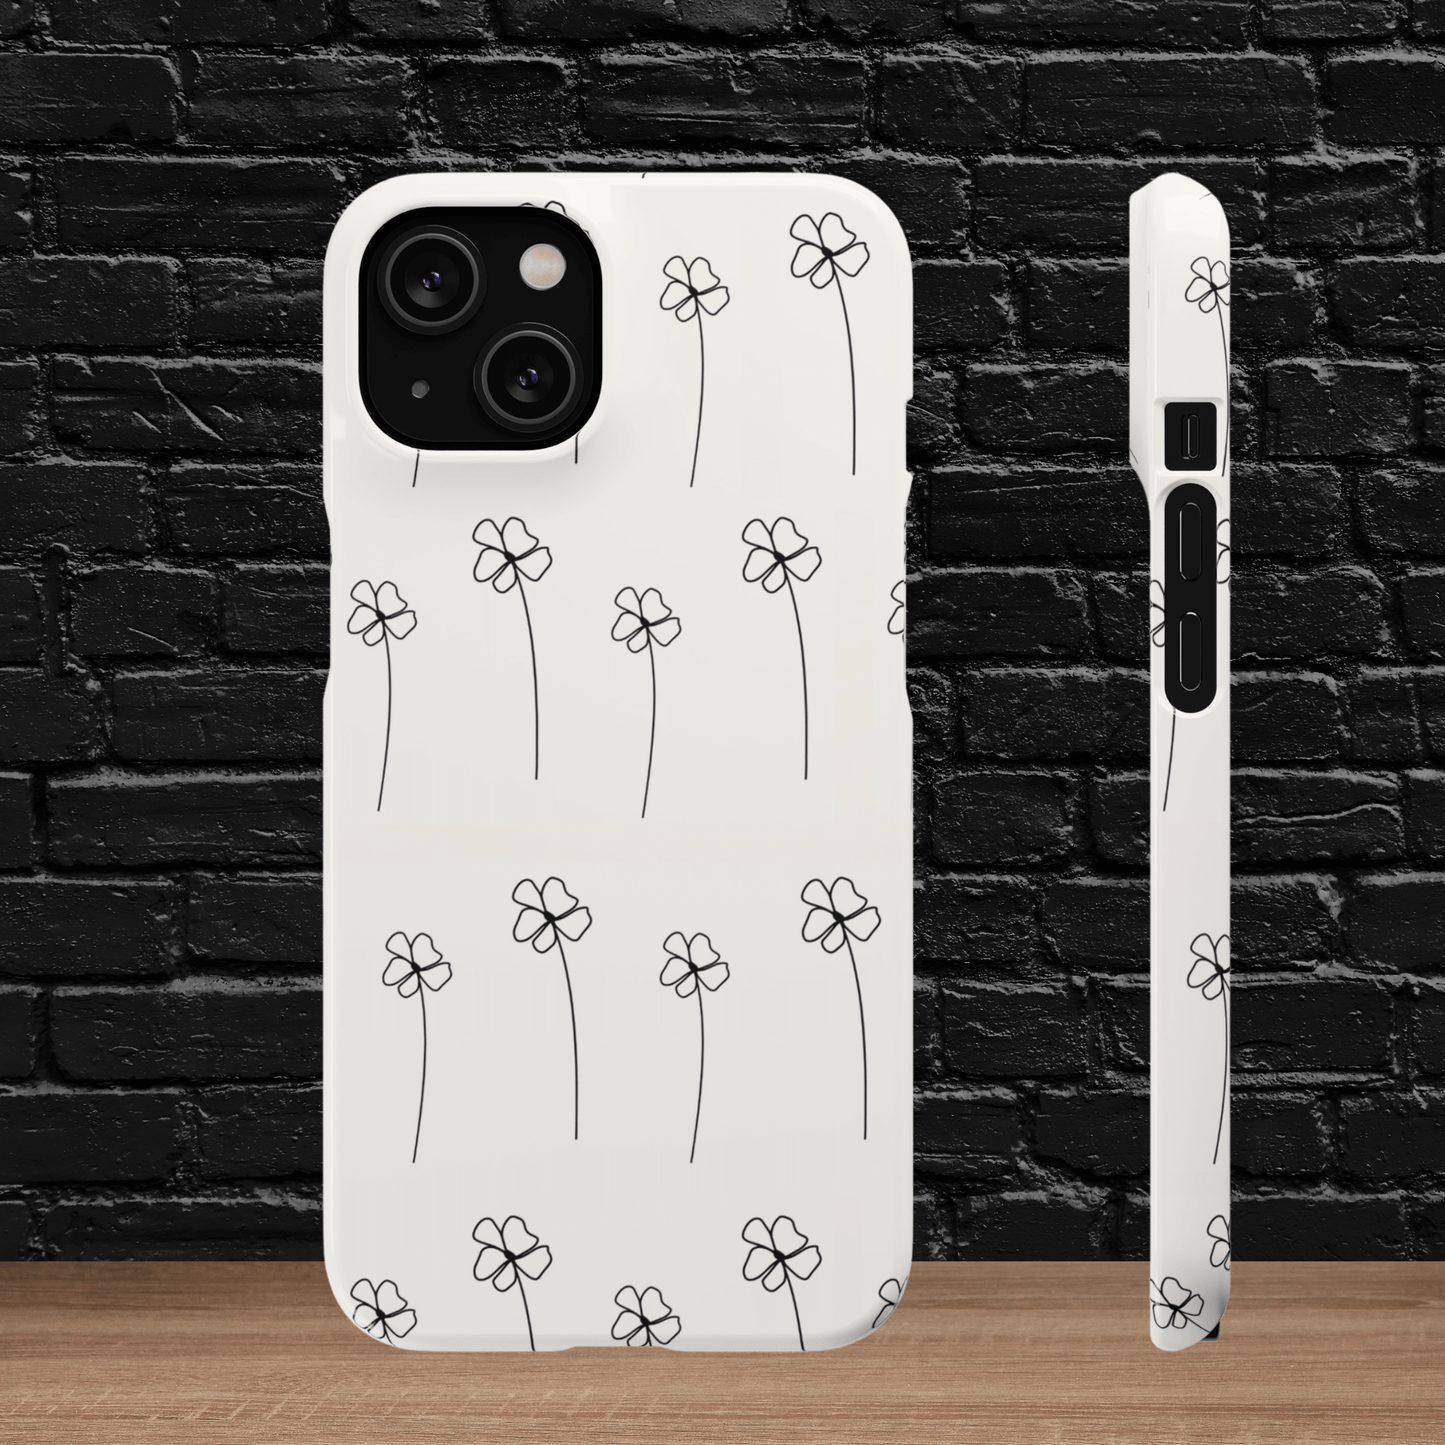 designer cell phone case in thirty six options.